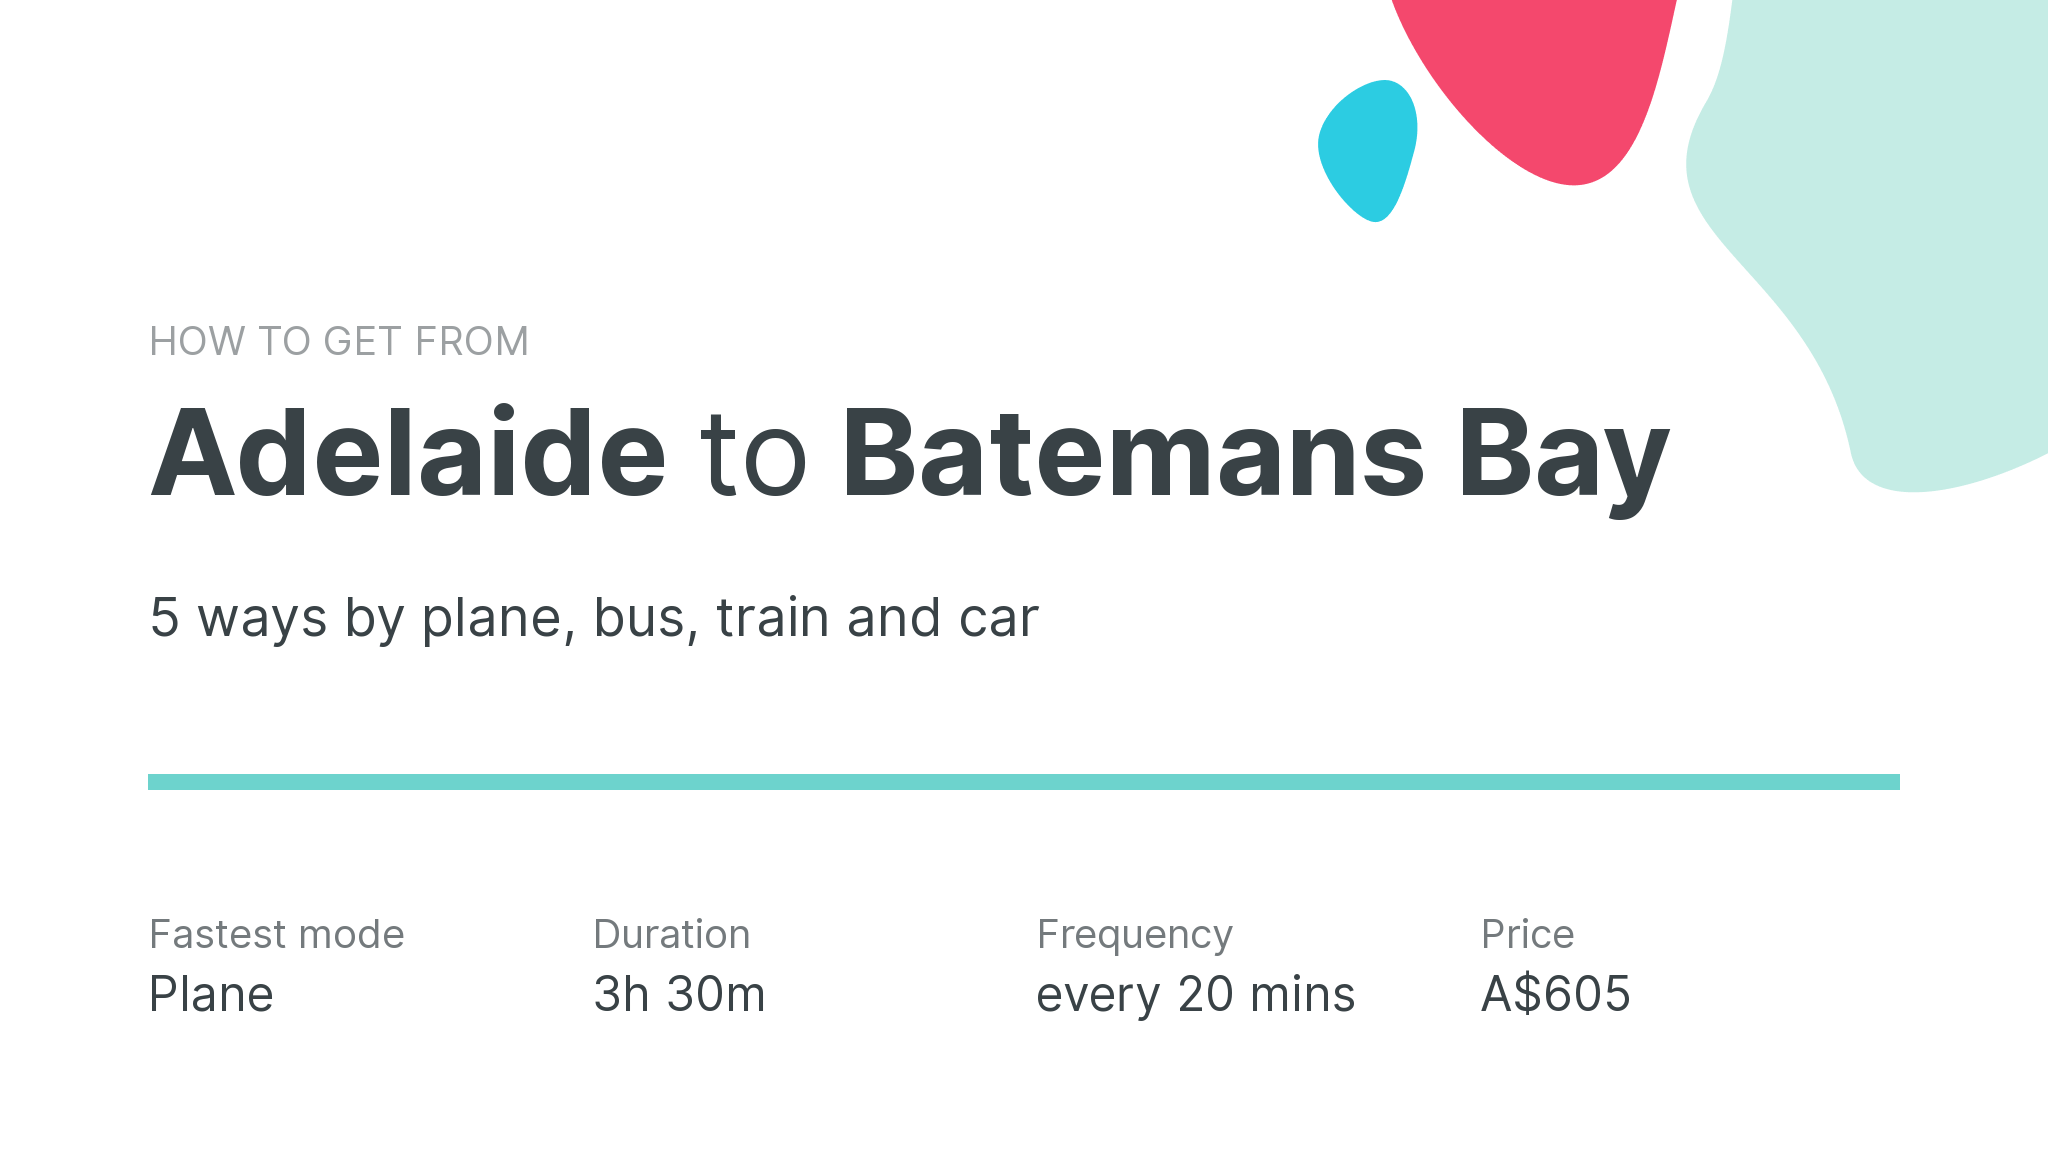 How do I get from Adelaide to Batemans Bay